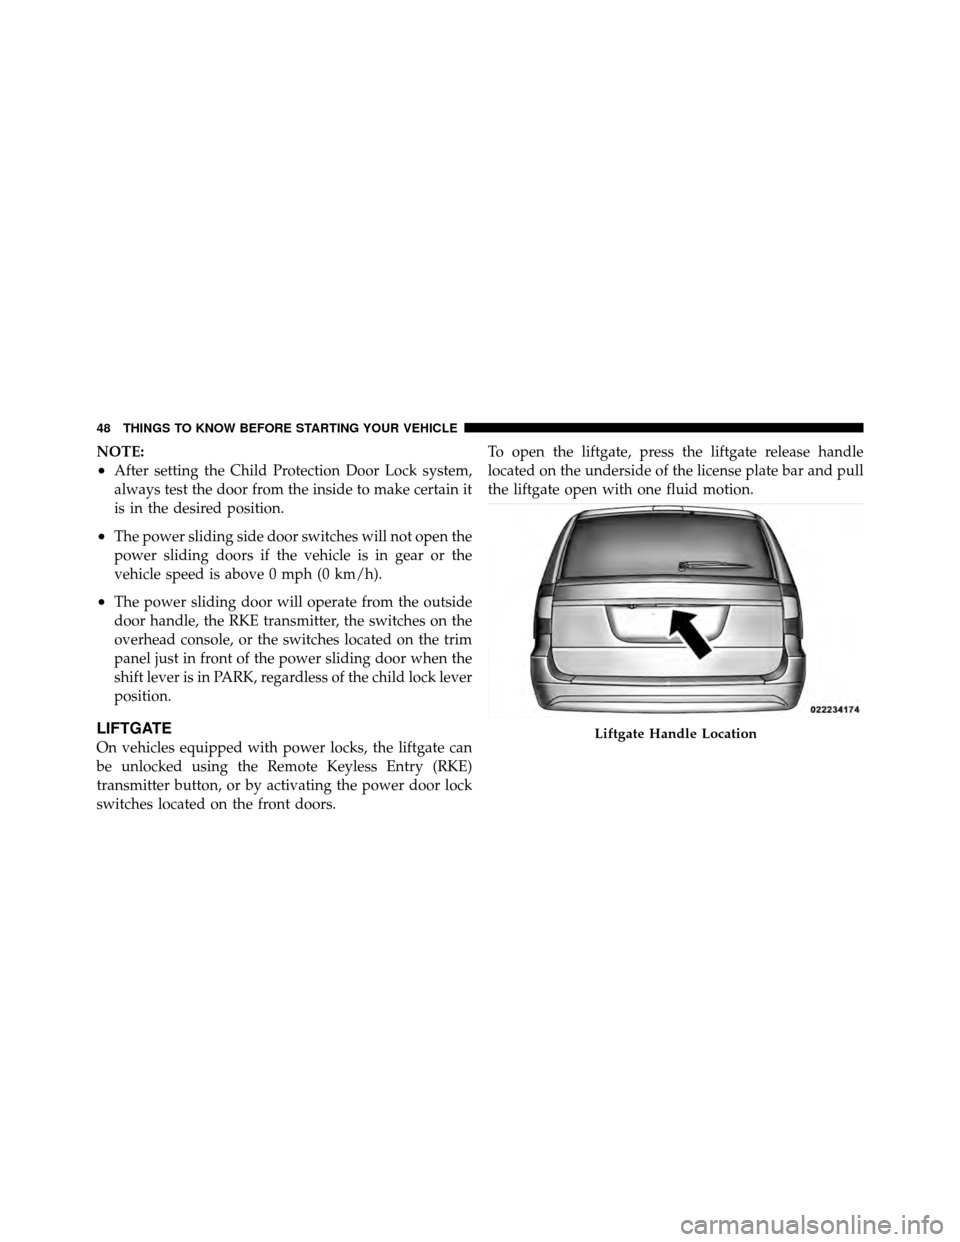 DODGE GRAND CARAVAN 2012 5.G Owners Manual NOTE:
•After setting the Child Protection Door Lock system,
always test the door from the inside to make certain it
is in the desired position.
•The power sliding side door switches will not open 